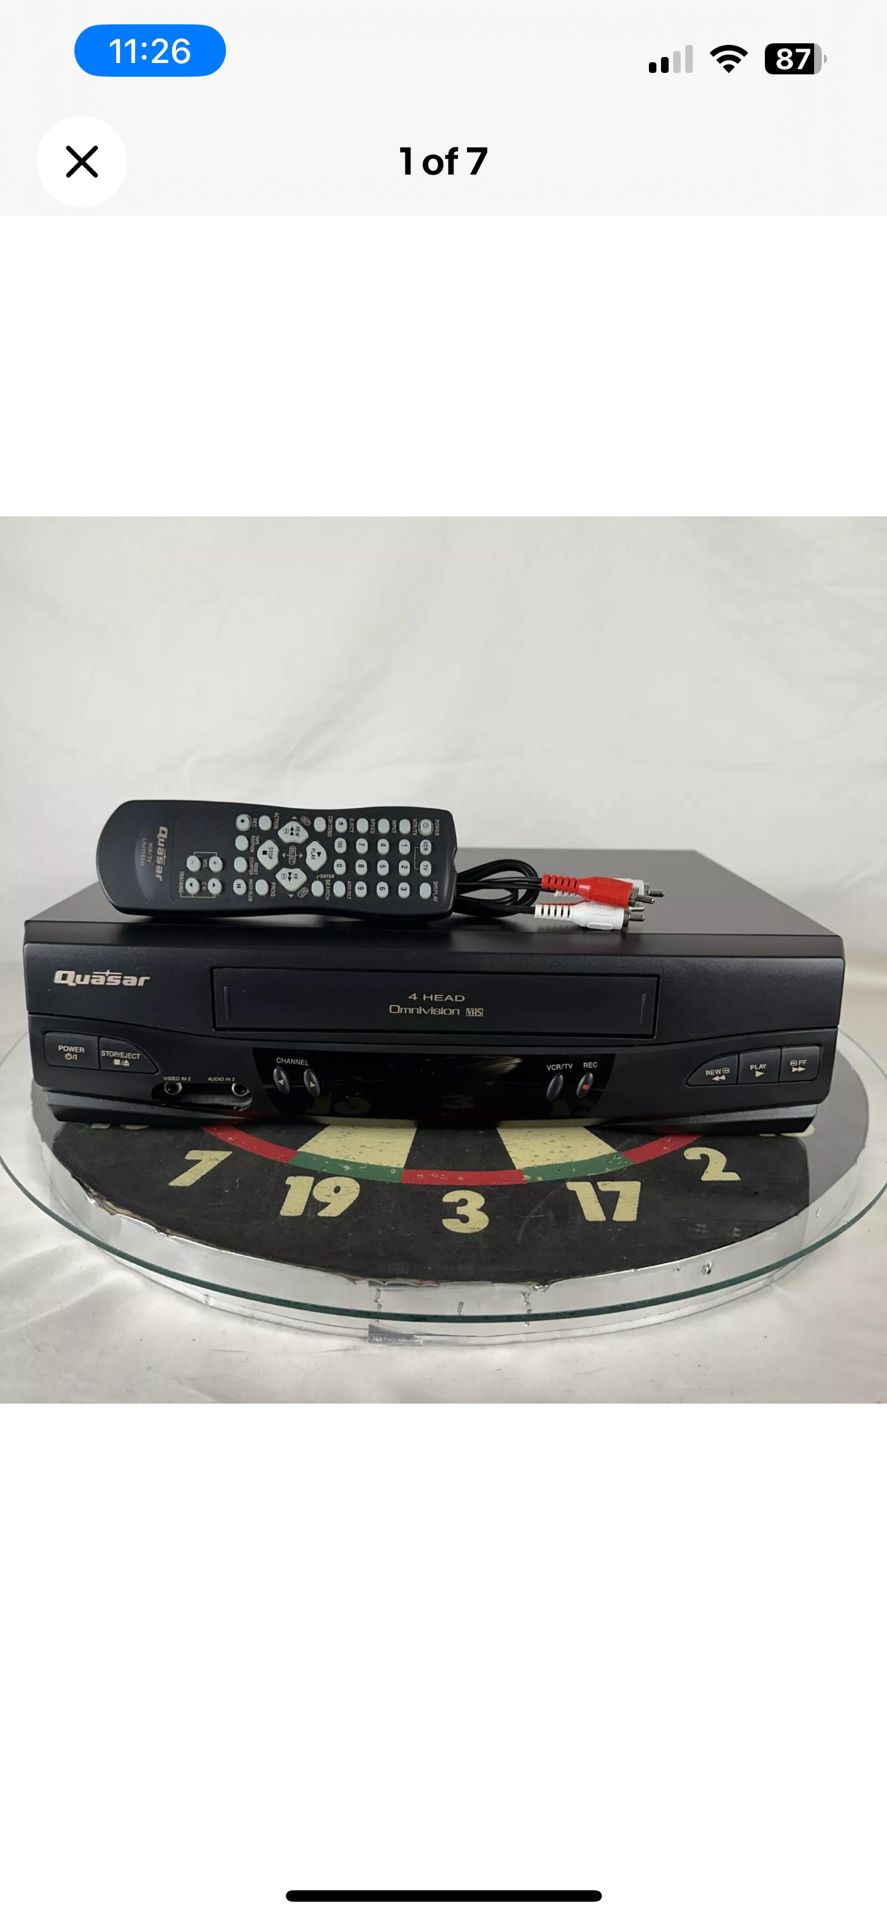 Quasar VHQ-41M 4-Head VHS VCR Cassette Tape Player Recorder W Remote - Tested